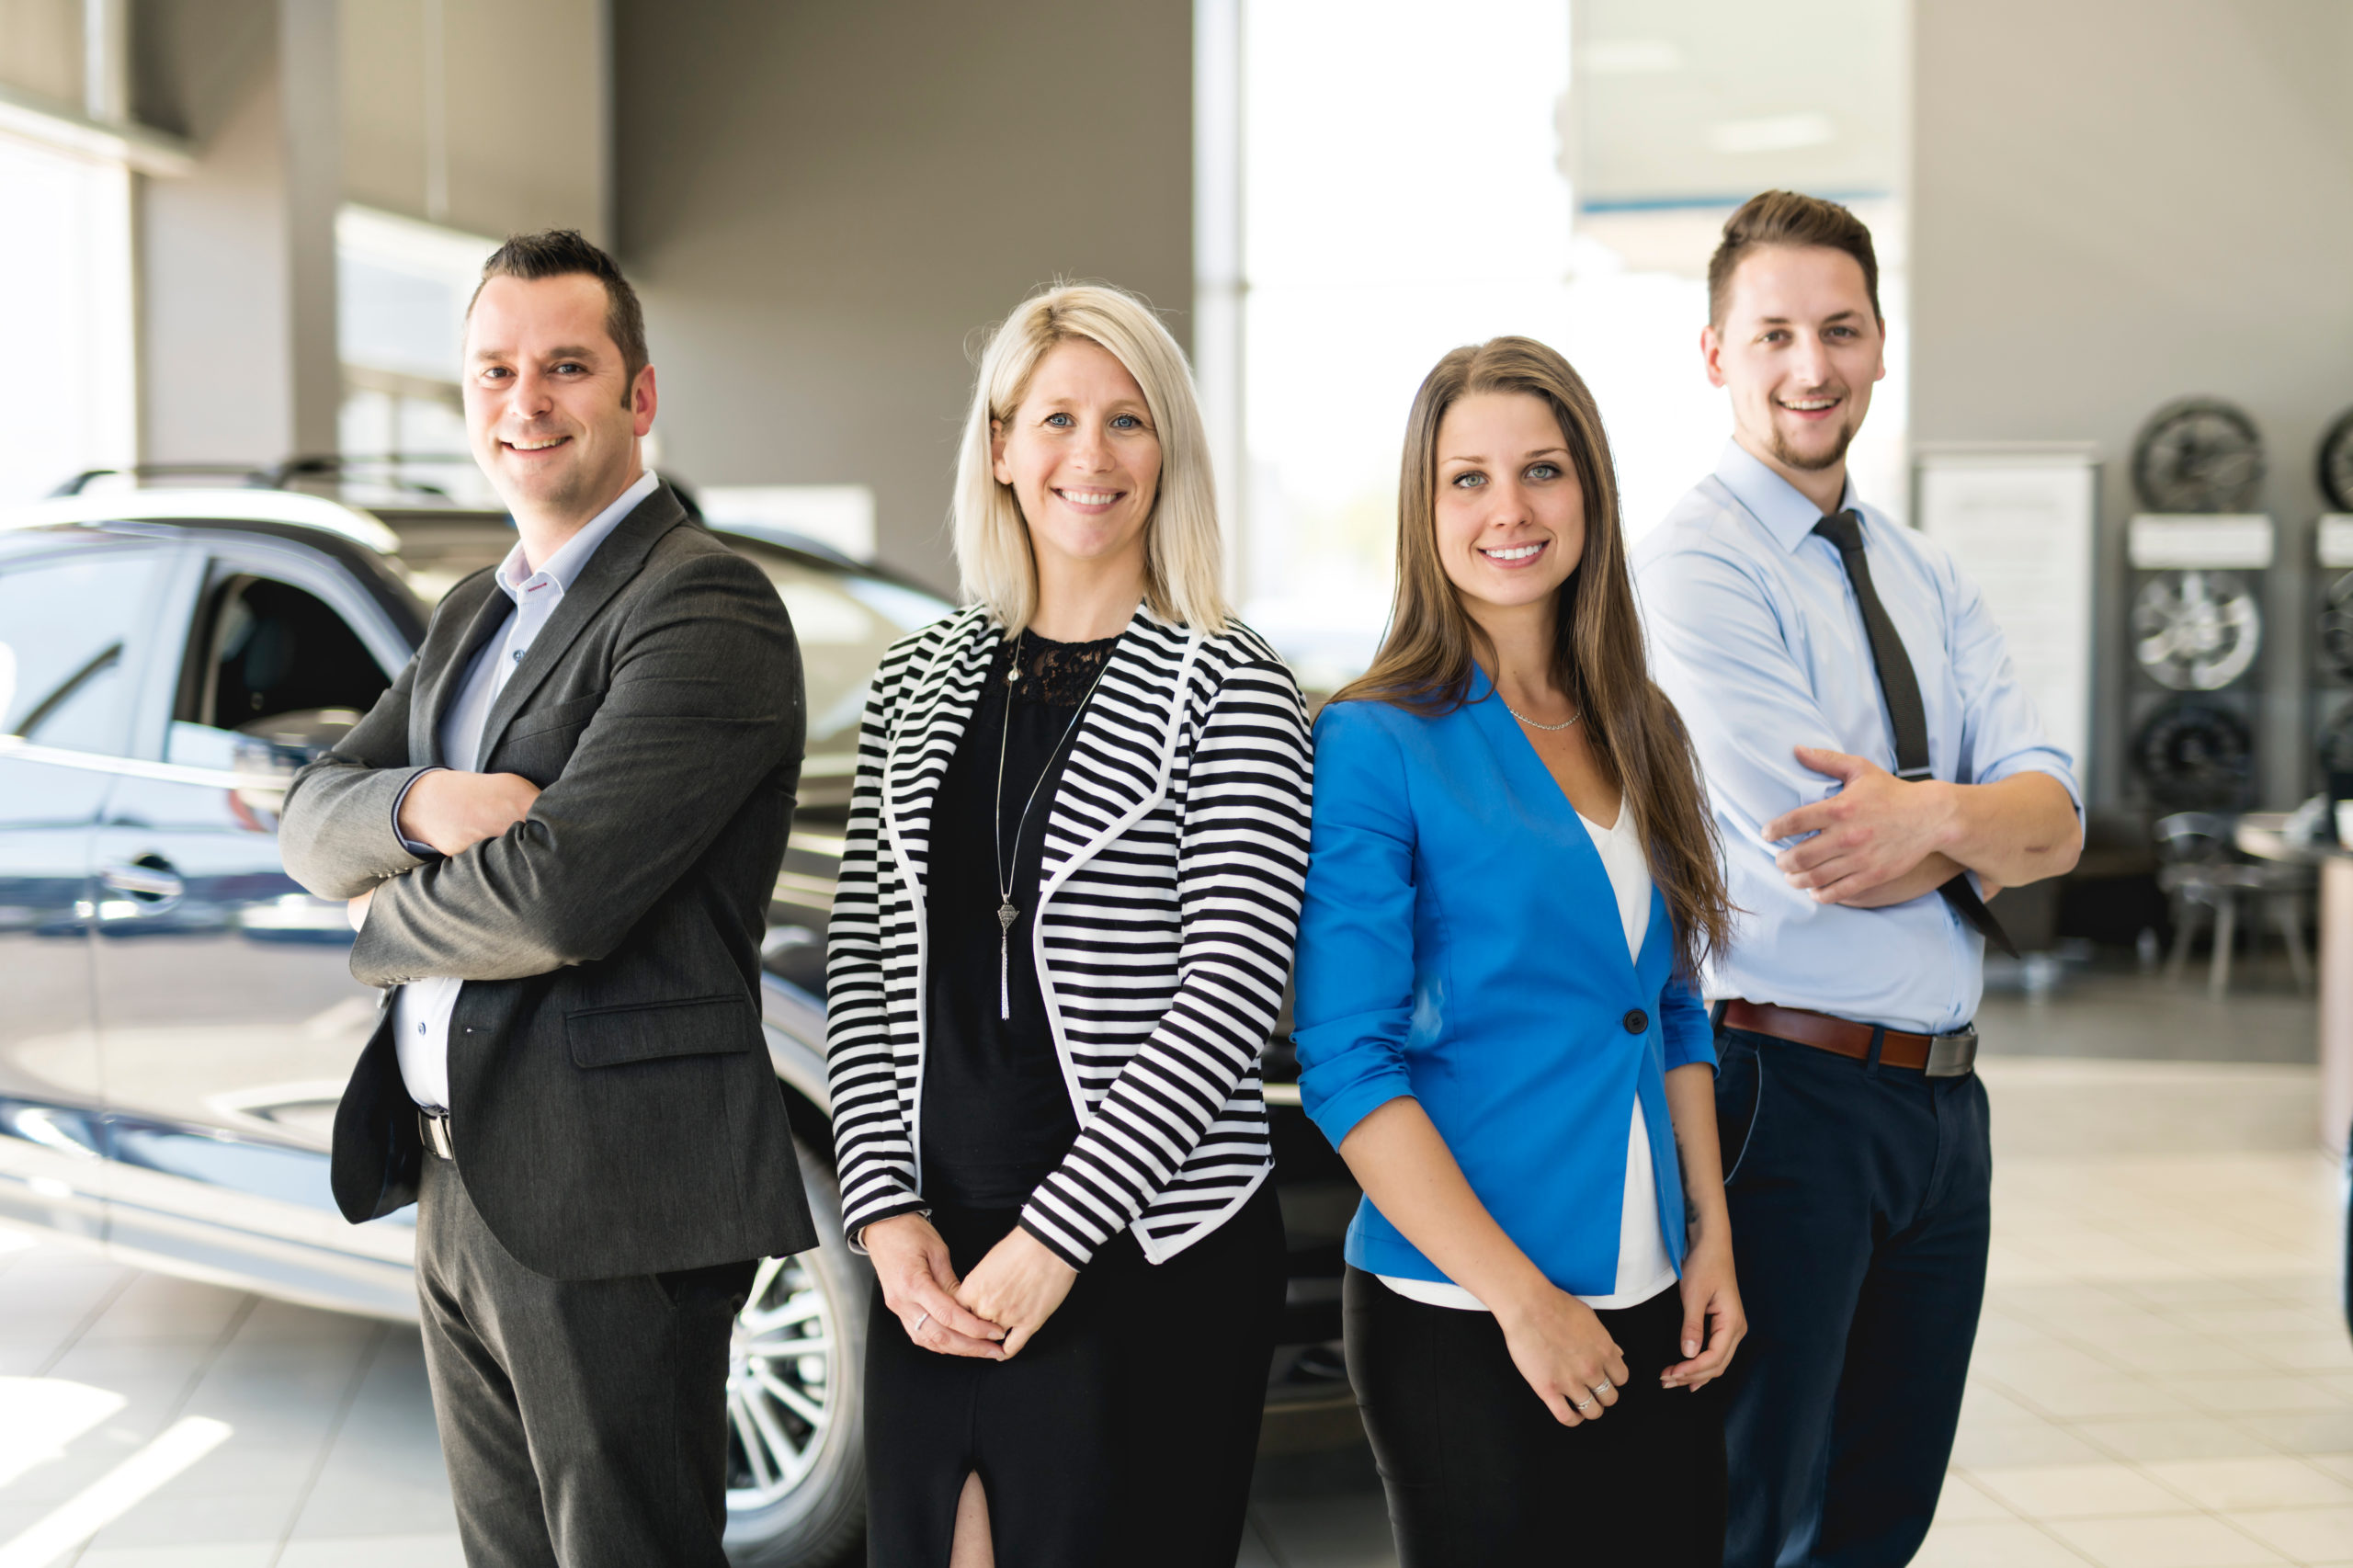 Summer Personnel Tune-Up. Since 1989, Autopeople has helped firm helping automotive dealerships recruit experienced people and automotive professionals advance their careers.